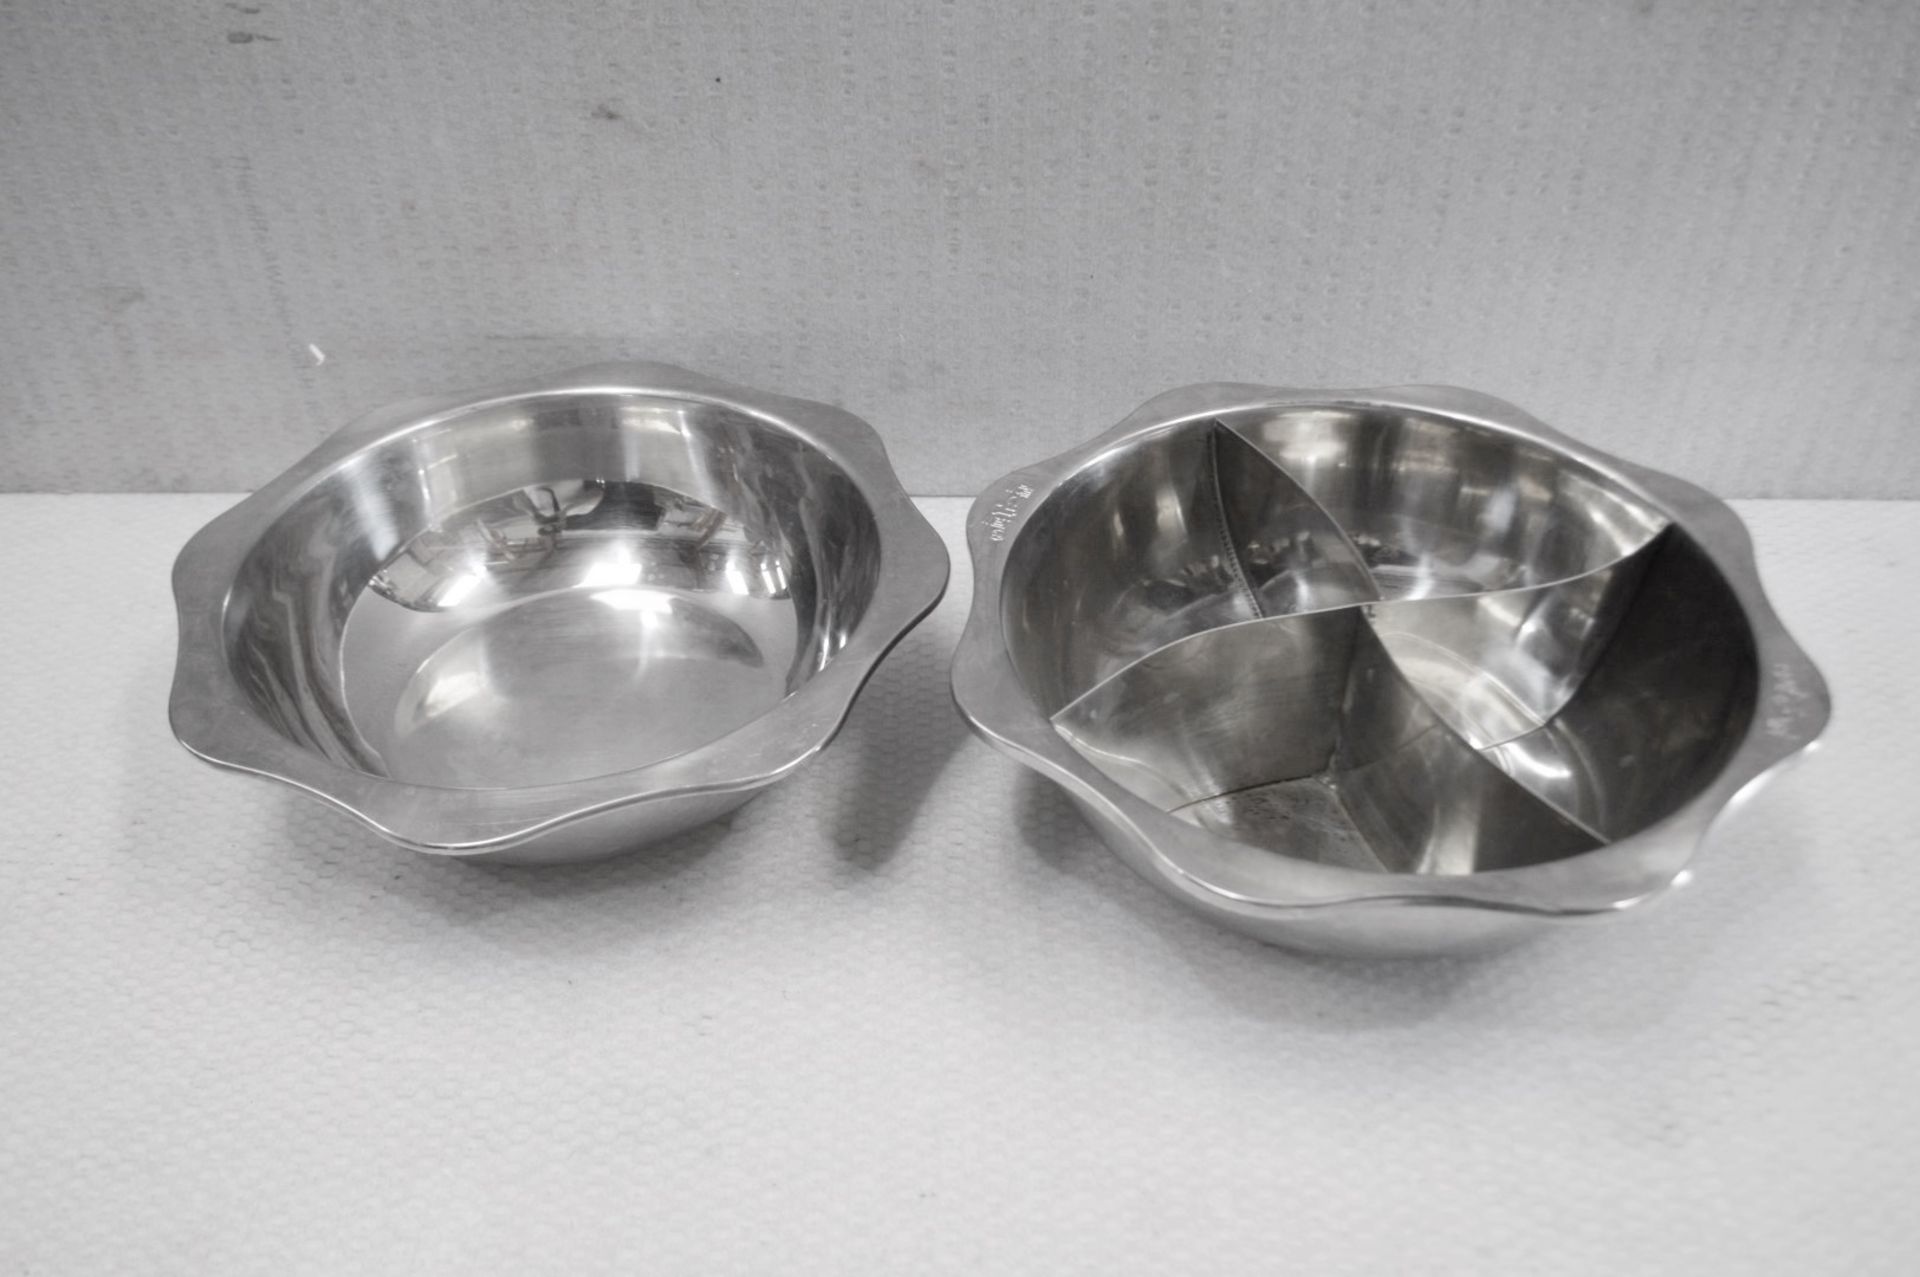 8 x Stainless Steel Buffet Serving Bowls- Dimensions: L37 x W37 x cm - Recently Removed From a